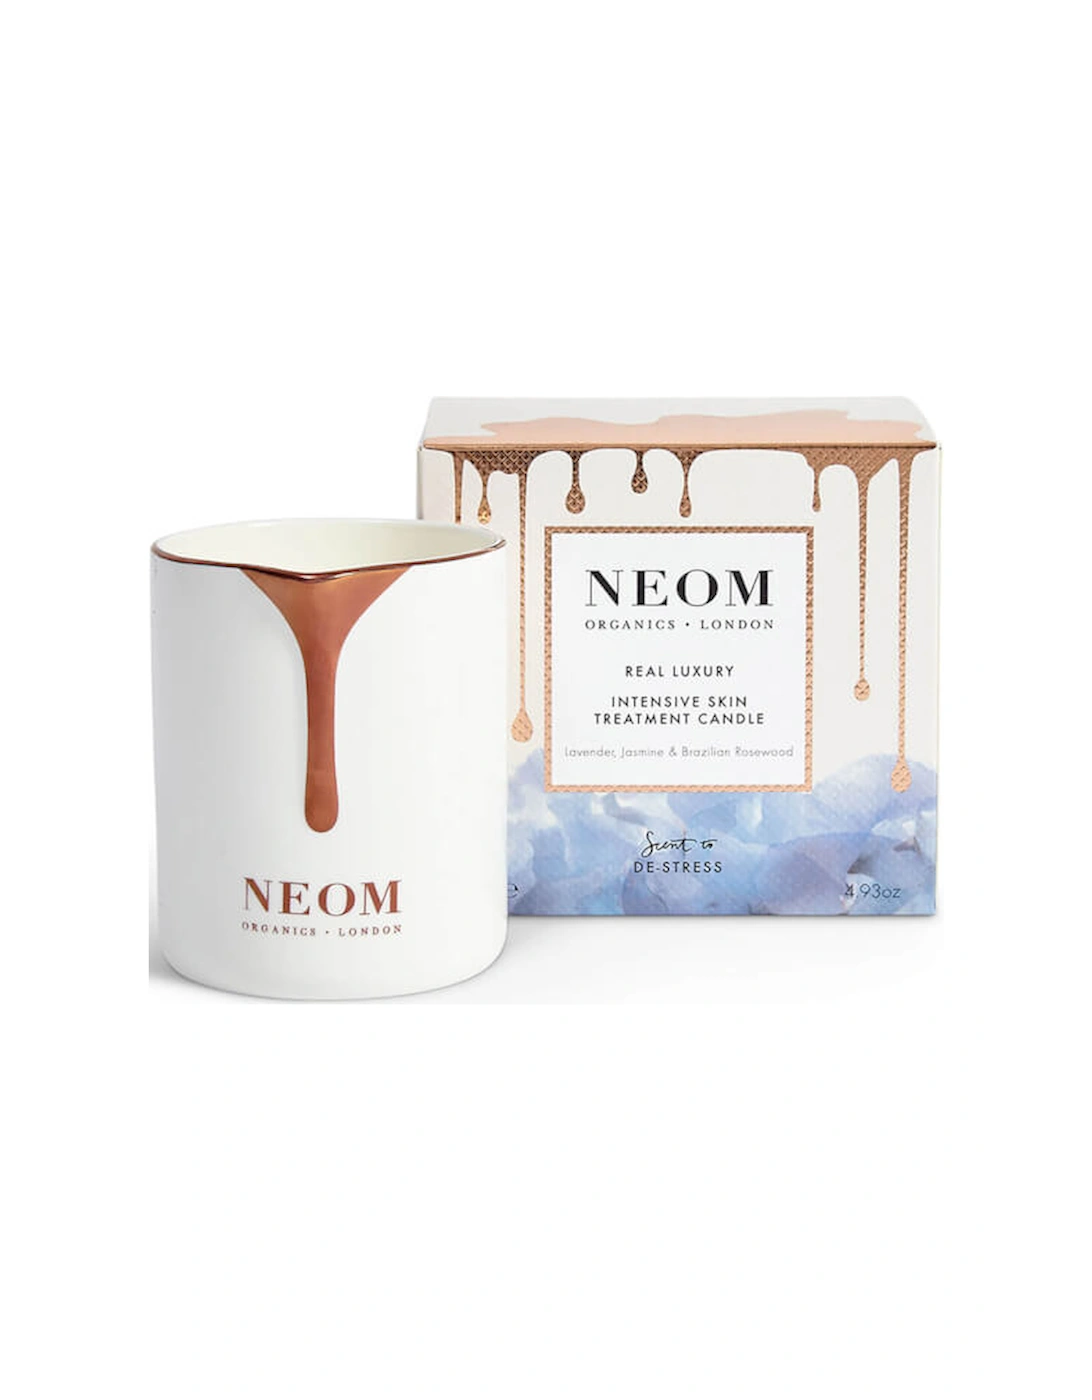 Real Luxury De-Stress Intensive Skin Treatment Candle - NEOM, 2 of 1